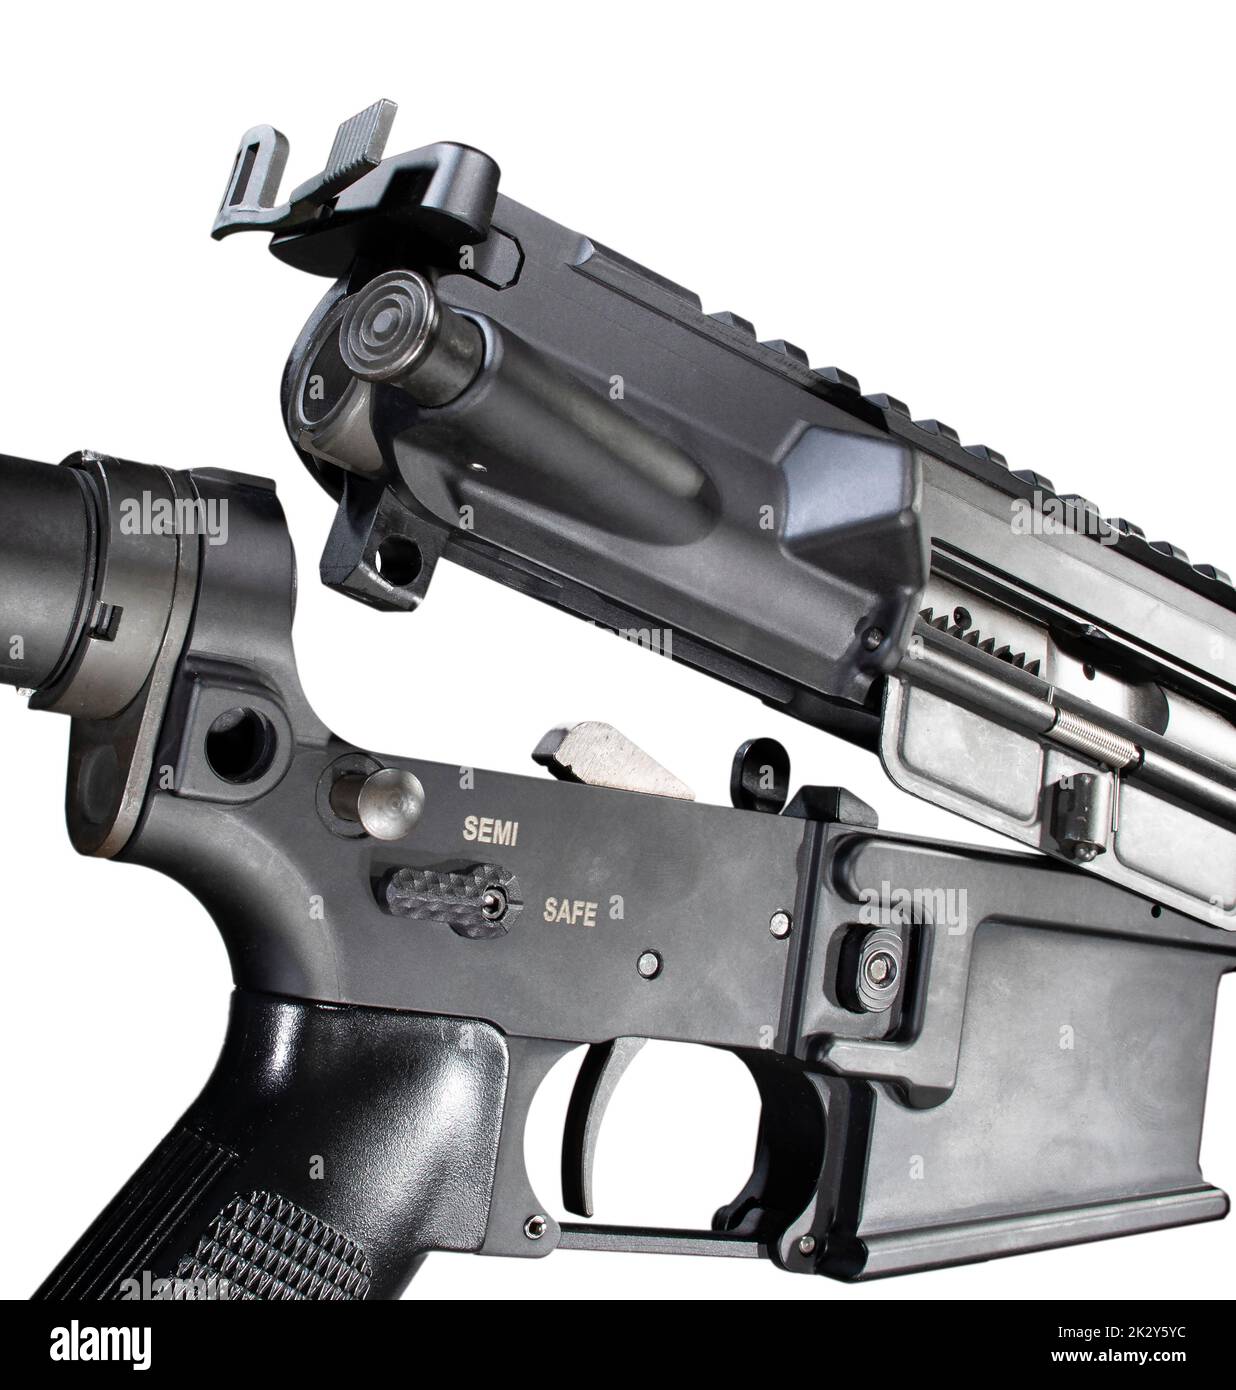 Upper and lower receiver separating in an assault rifle on white Stock Photo